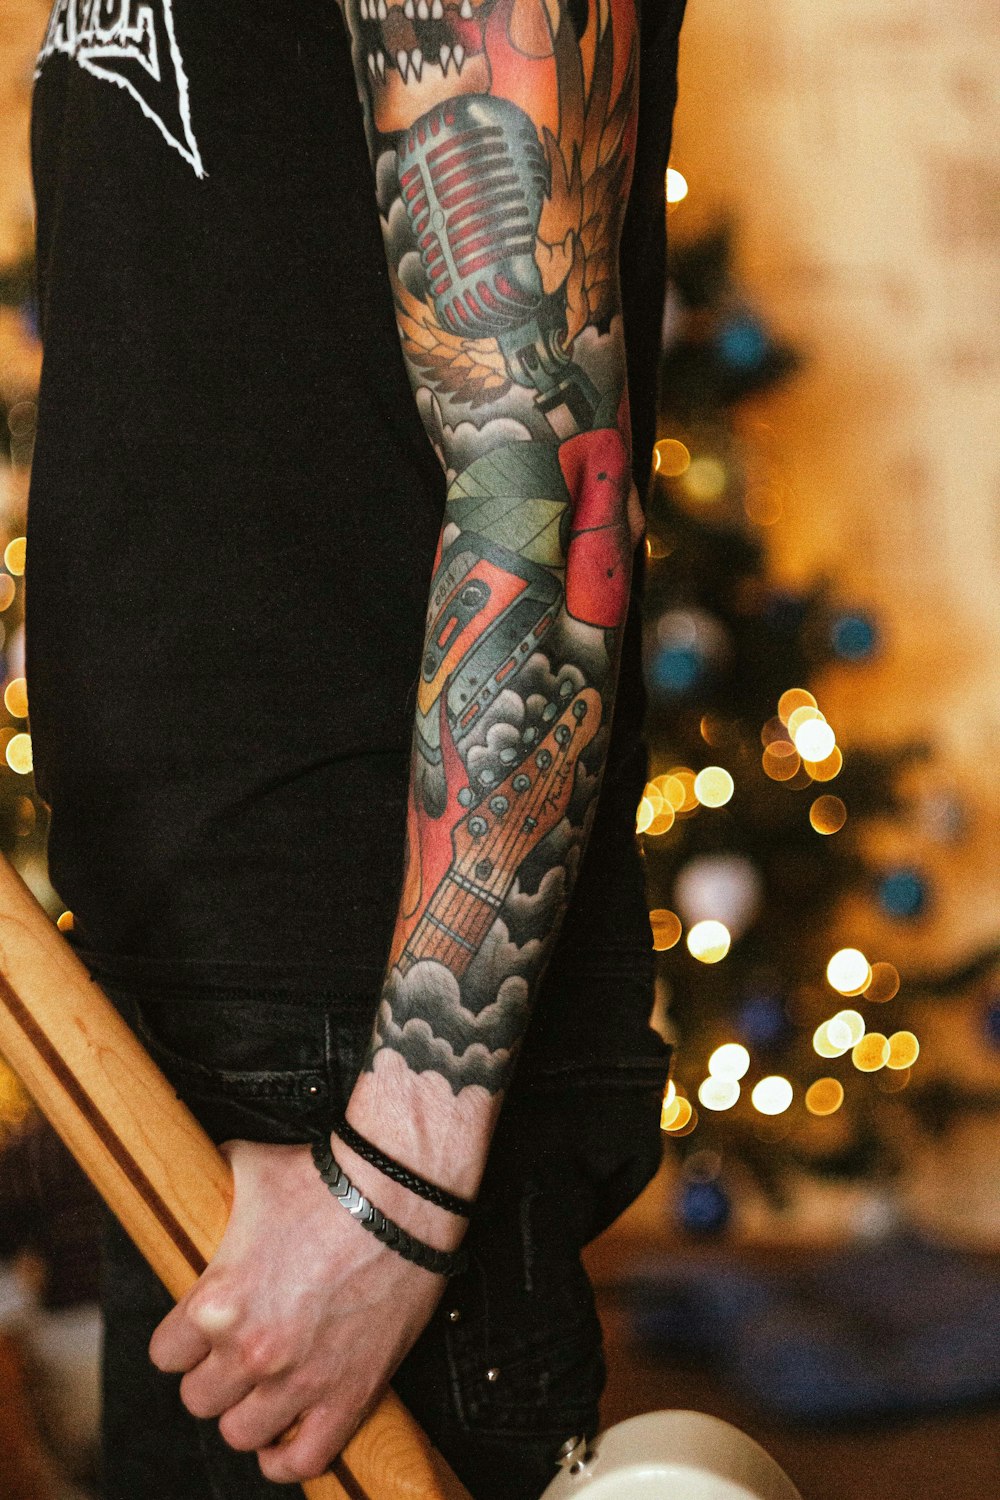 a man with a tattoo on his arm holding a baseball bat